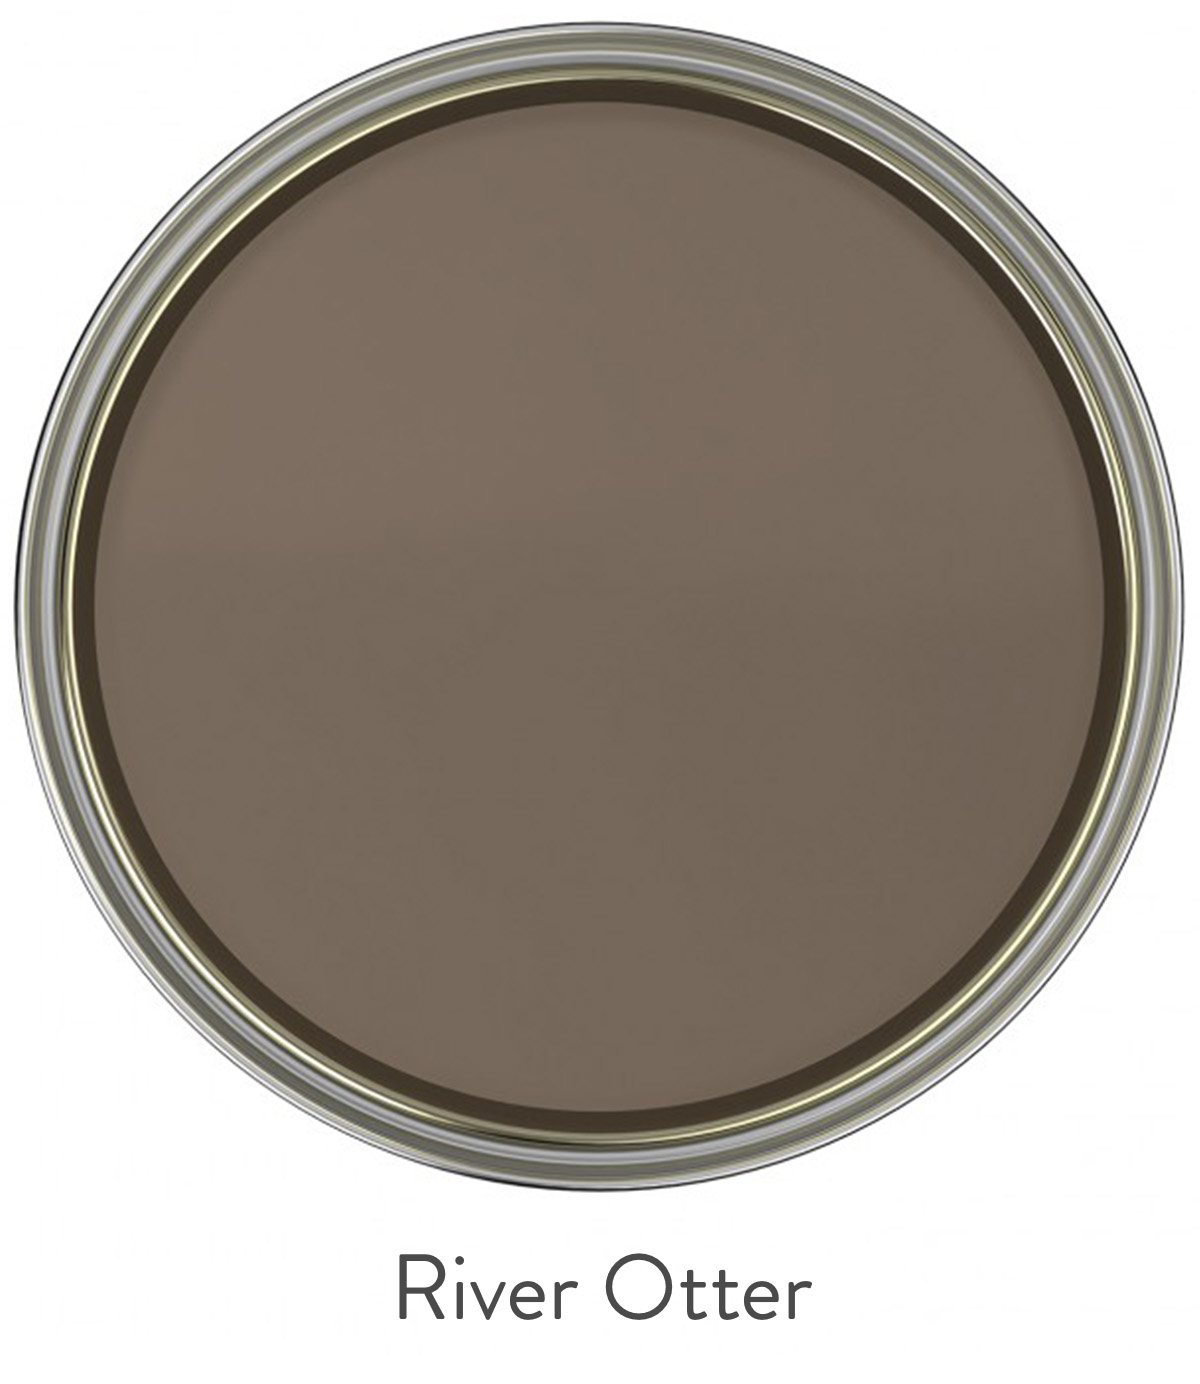 The Pure Edit River Otter Paint